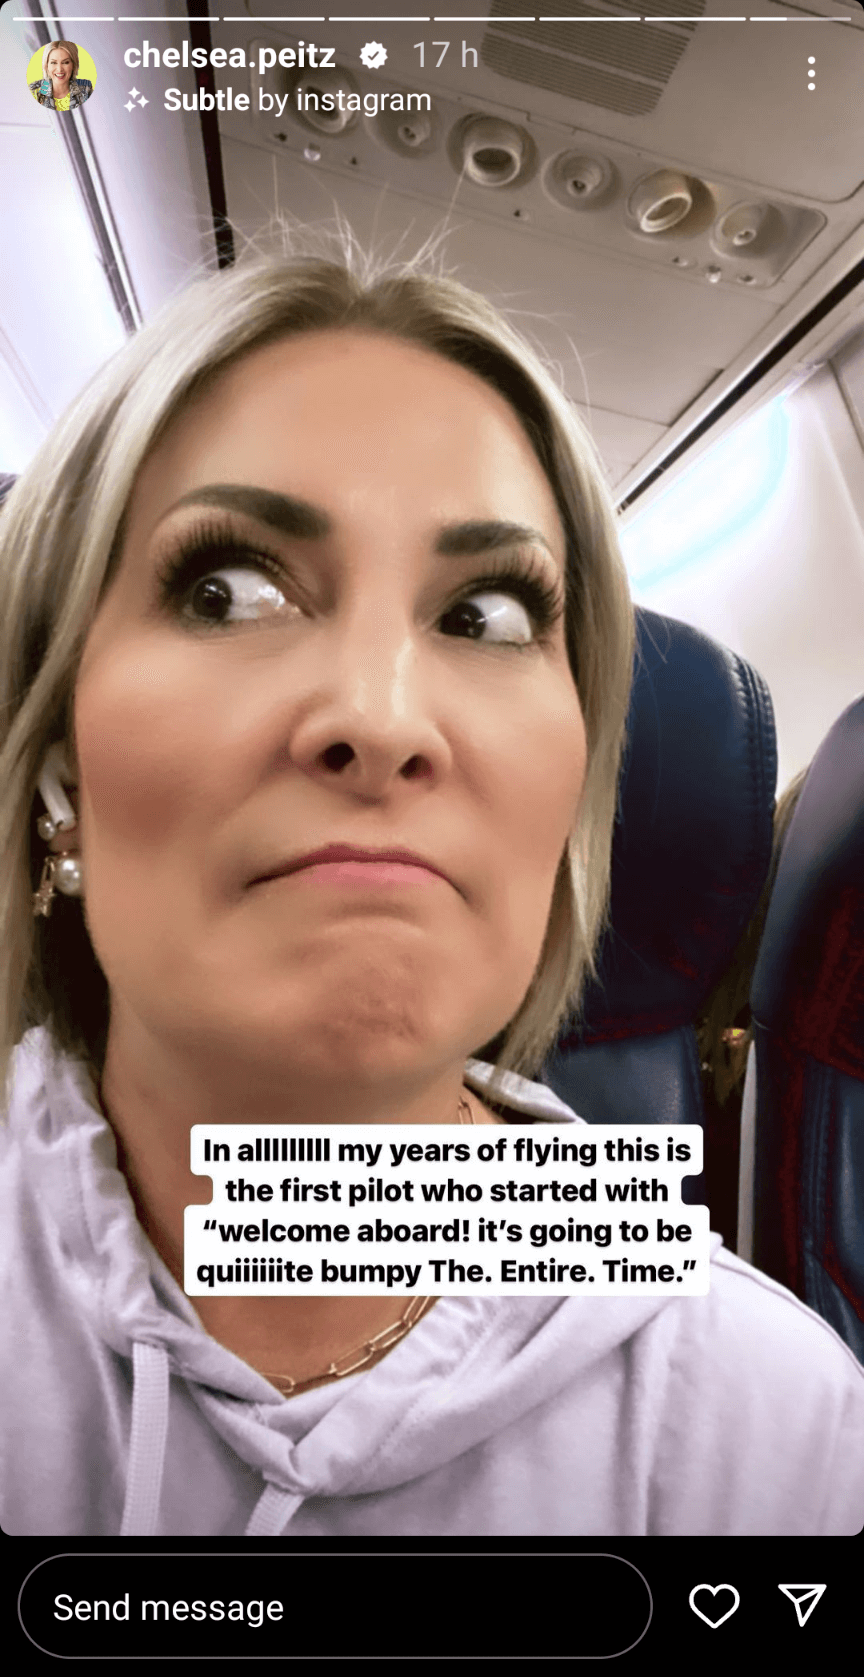 conversions-with-instagram-stories-chelsea-peitz-bumpy-plane-ride-story-5-5